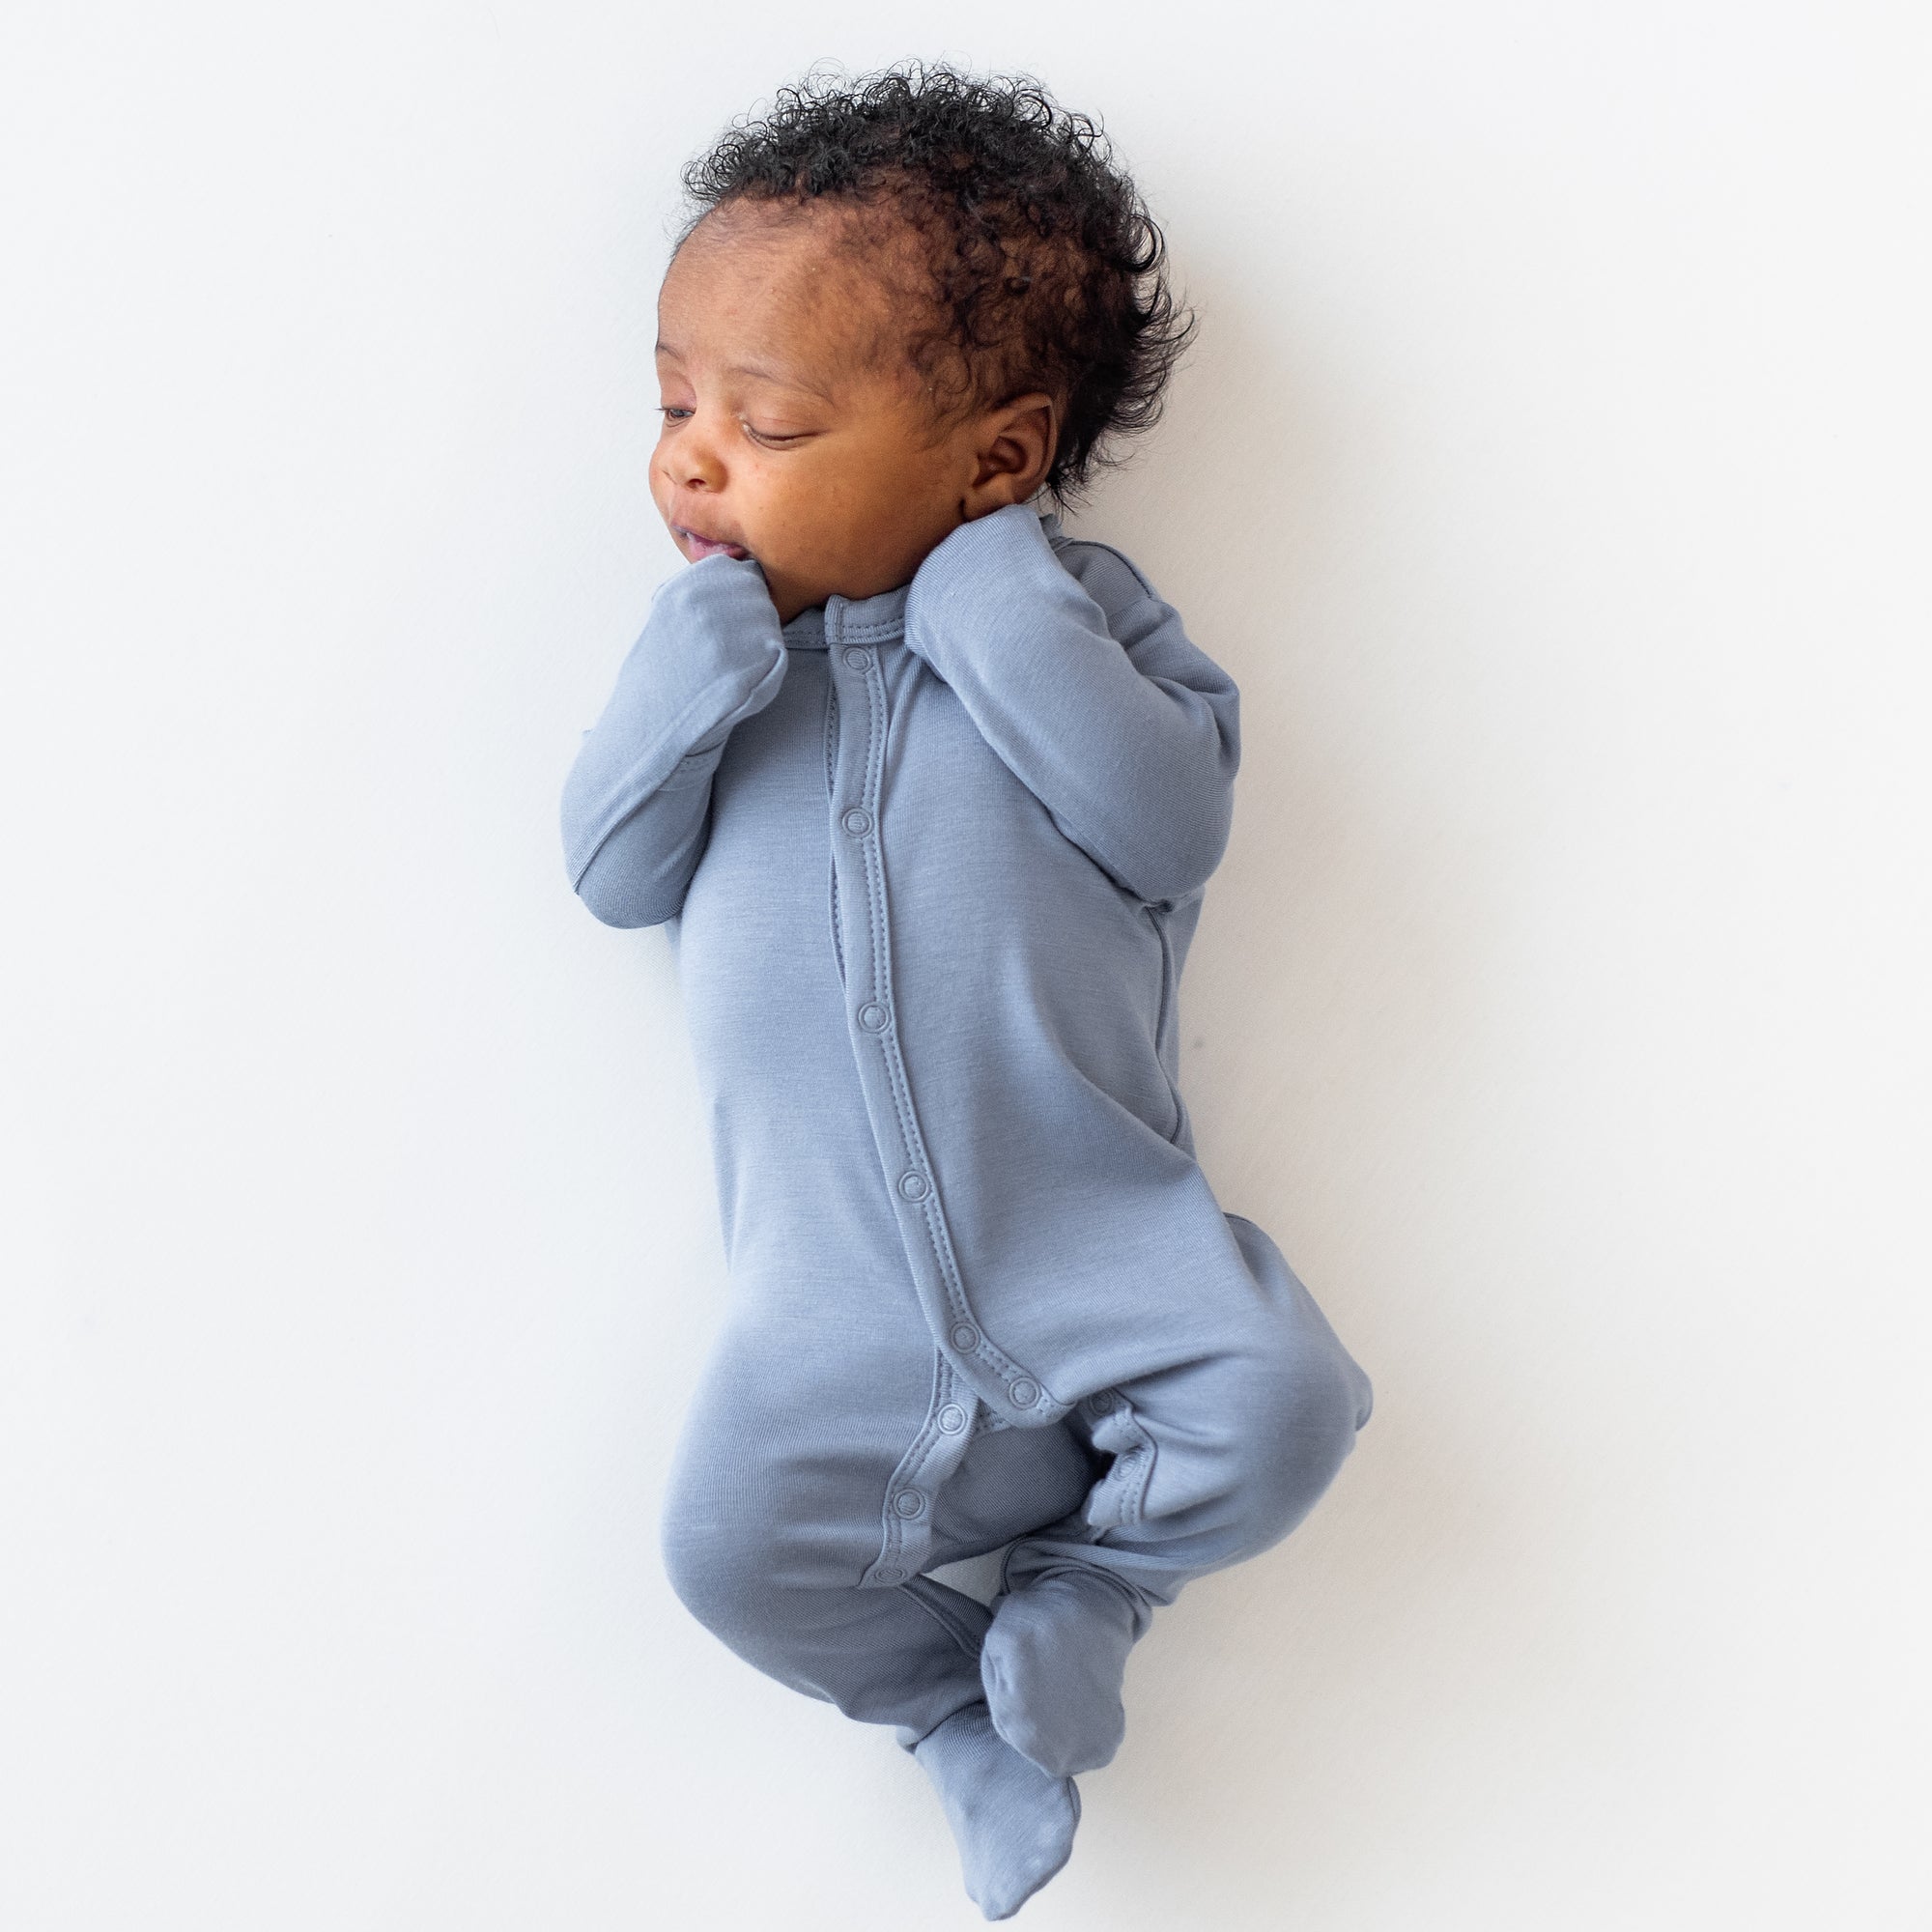 baby lying with hands near face in blue footie